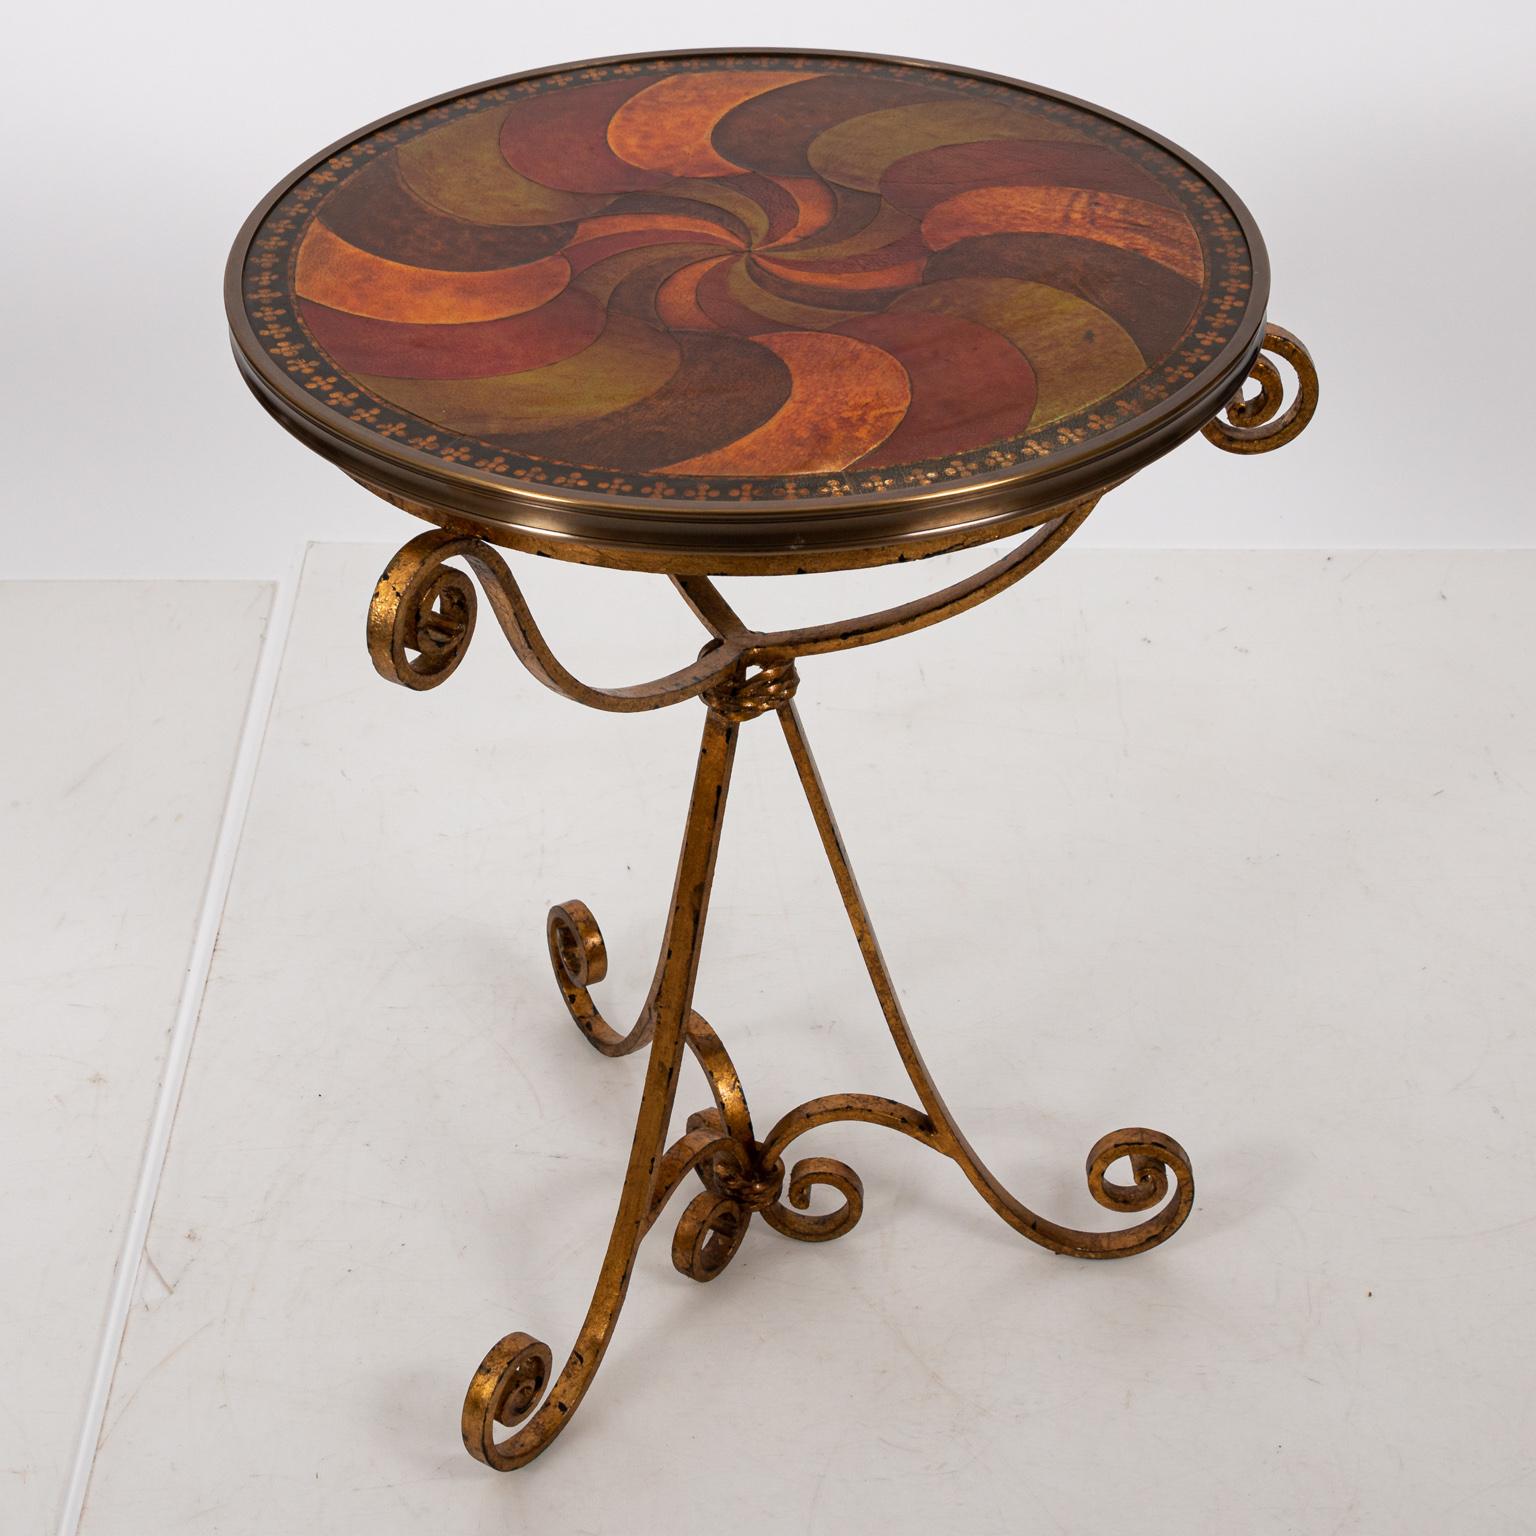 Round swirl embossed leather top table with iron gilt base, circa 1980s. Please note of wear consistent with age and use.